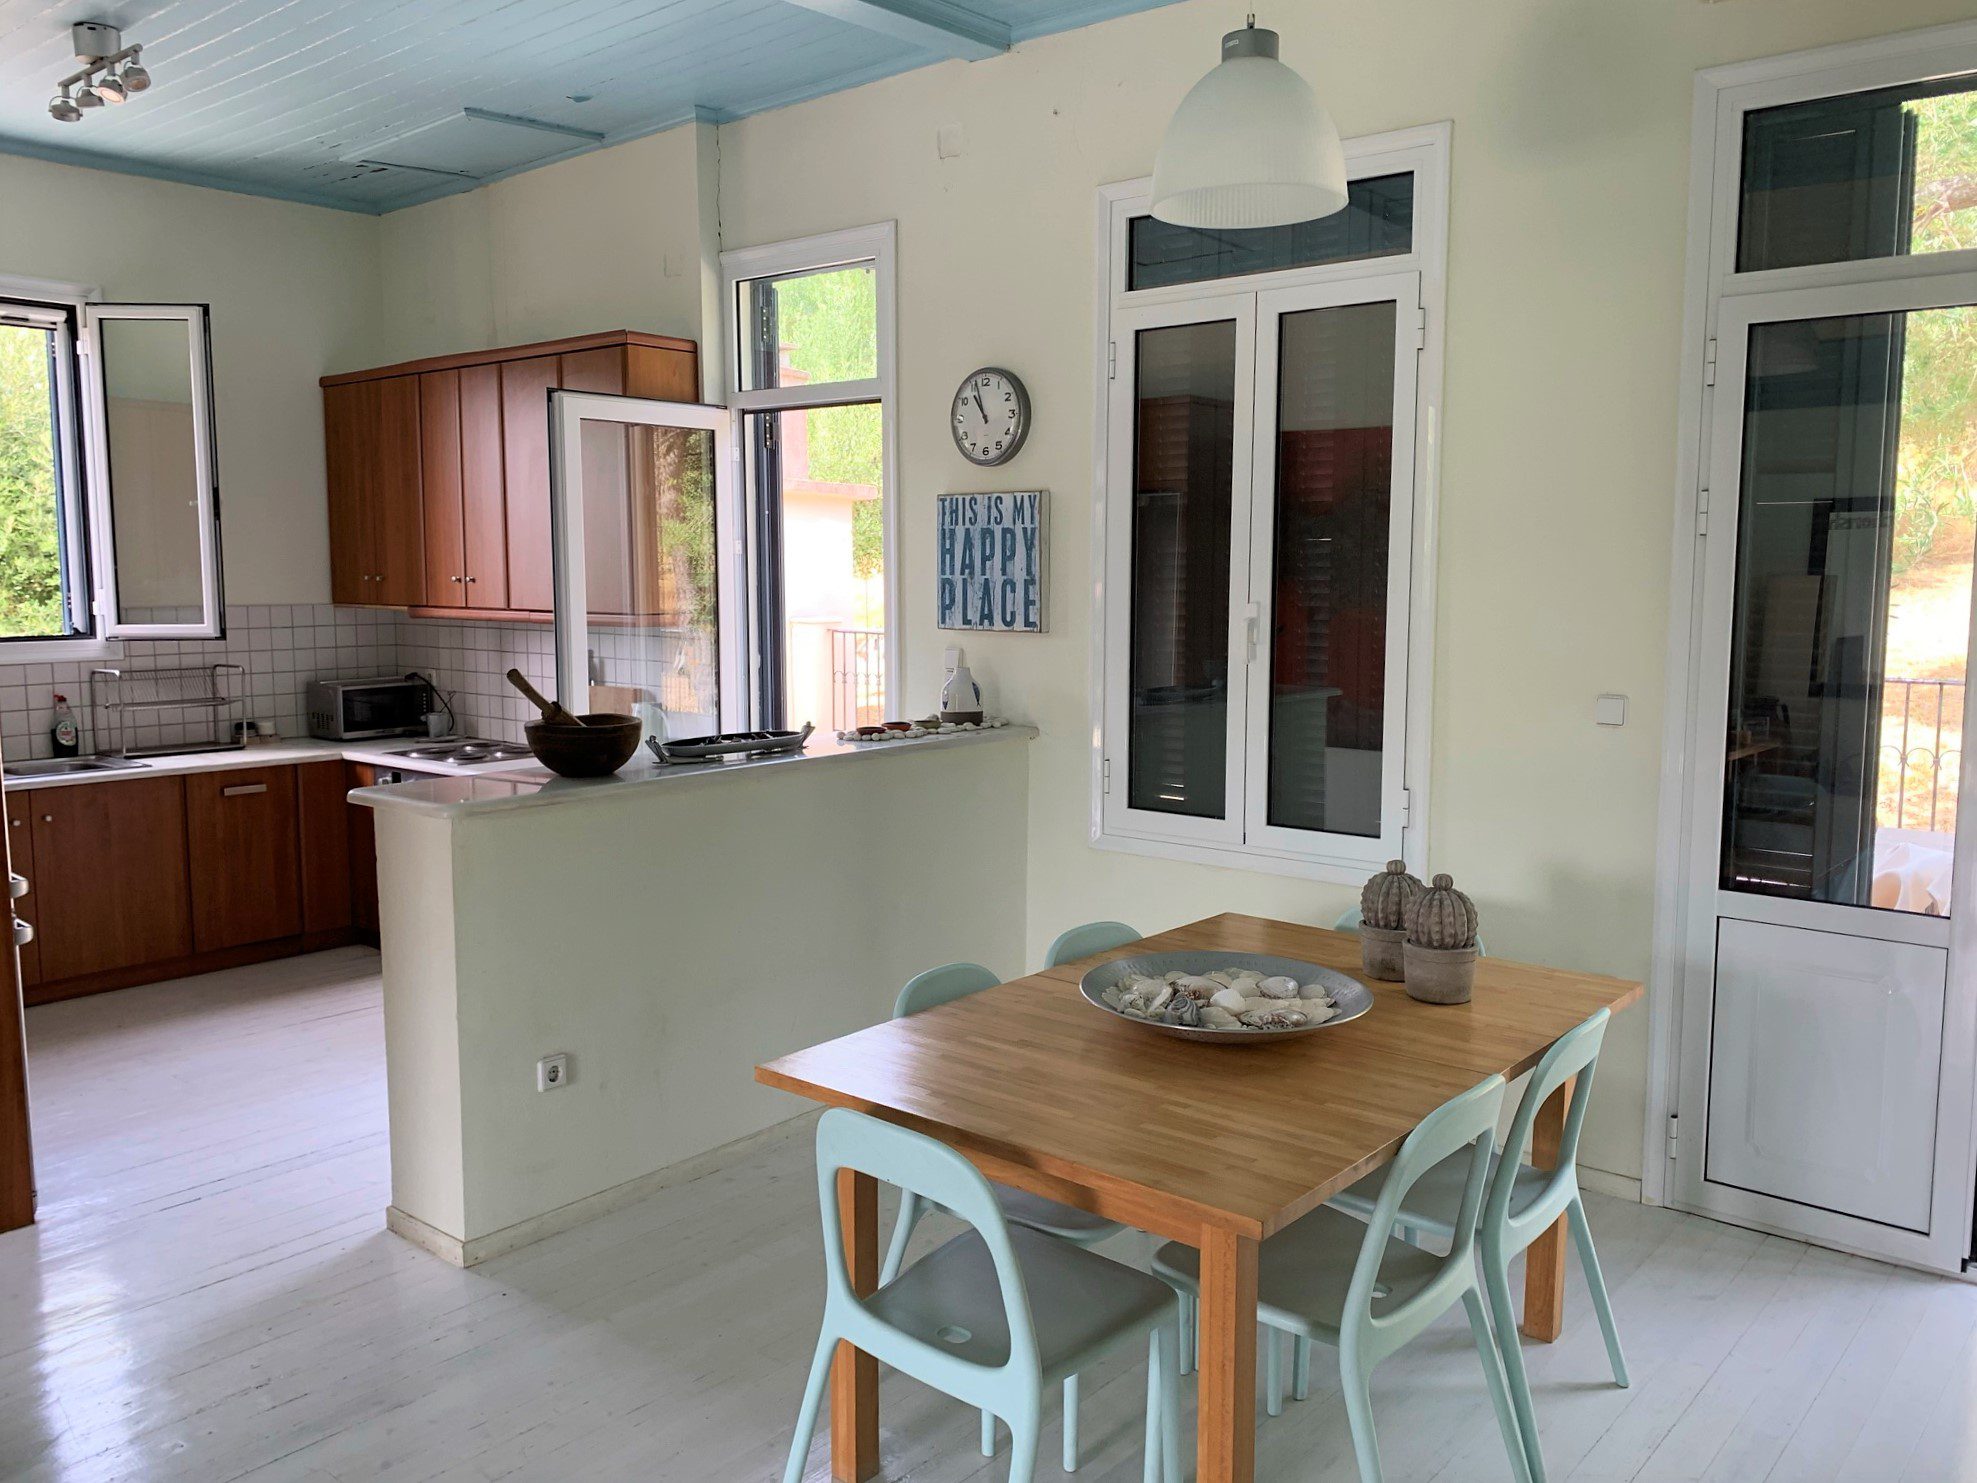 Kitchen area of holiday house for rent on Ithaca Greece, Kolleri